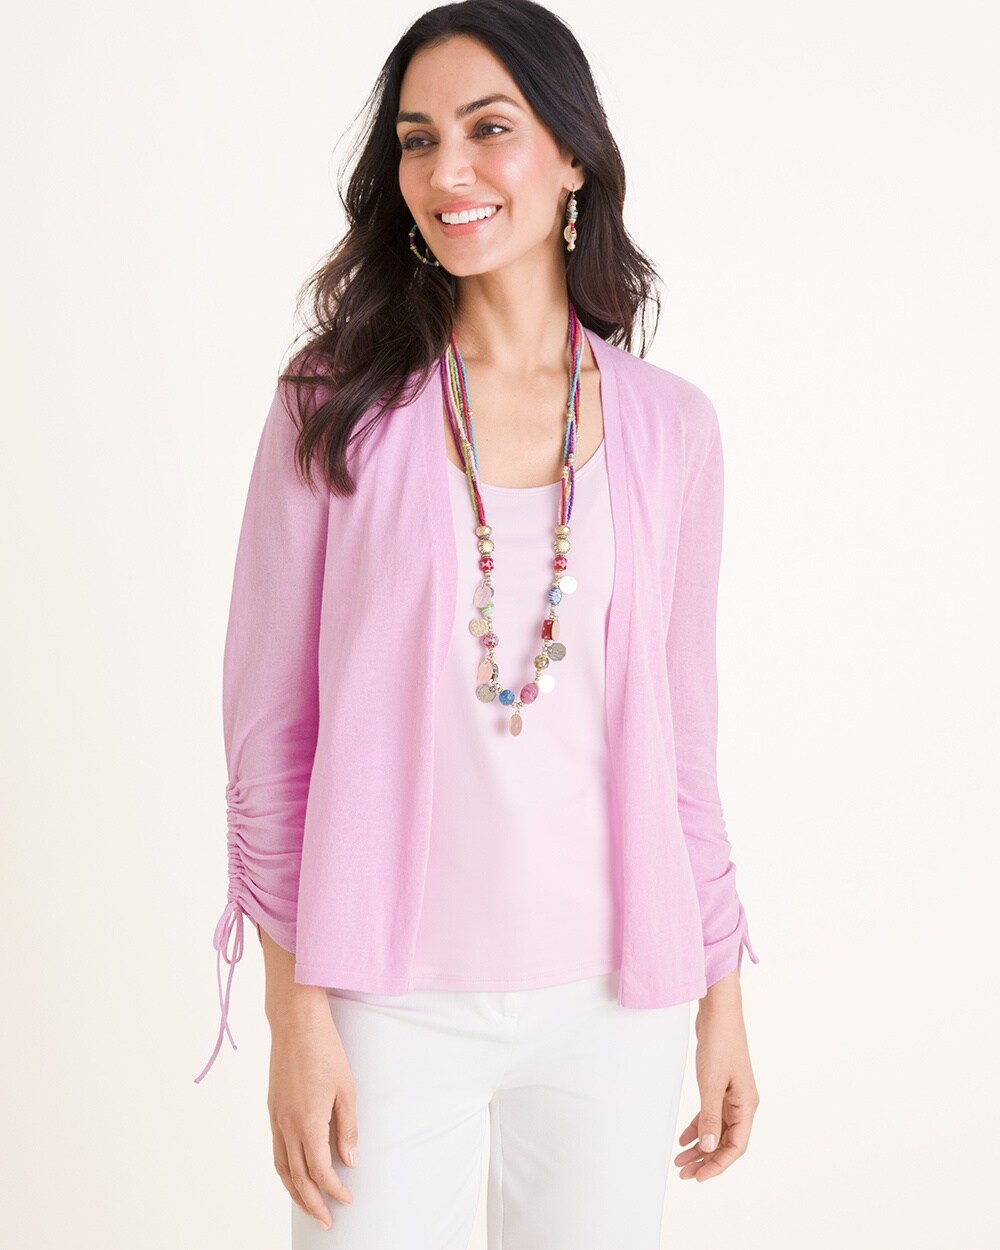 Ruched-Sleeve Cardigan